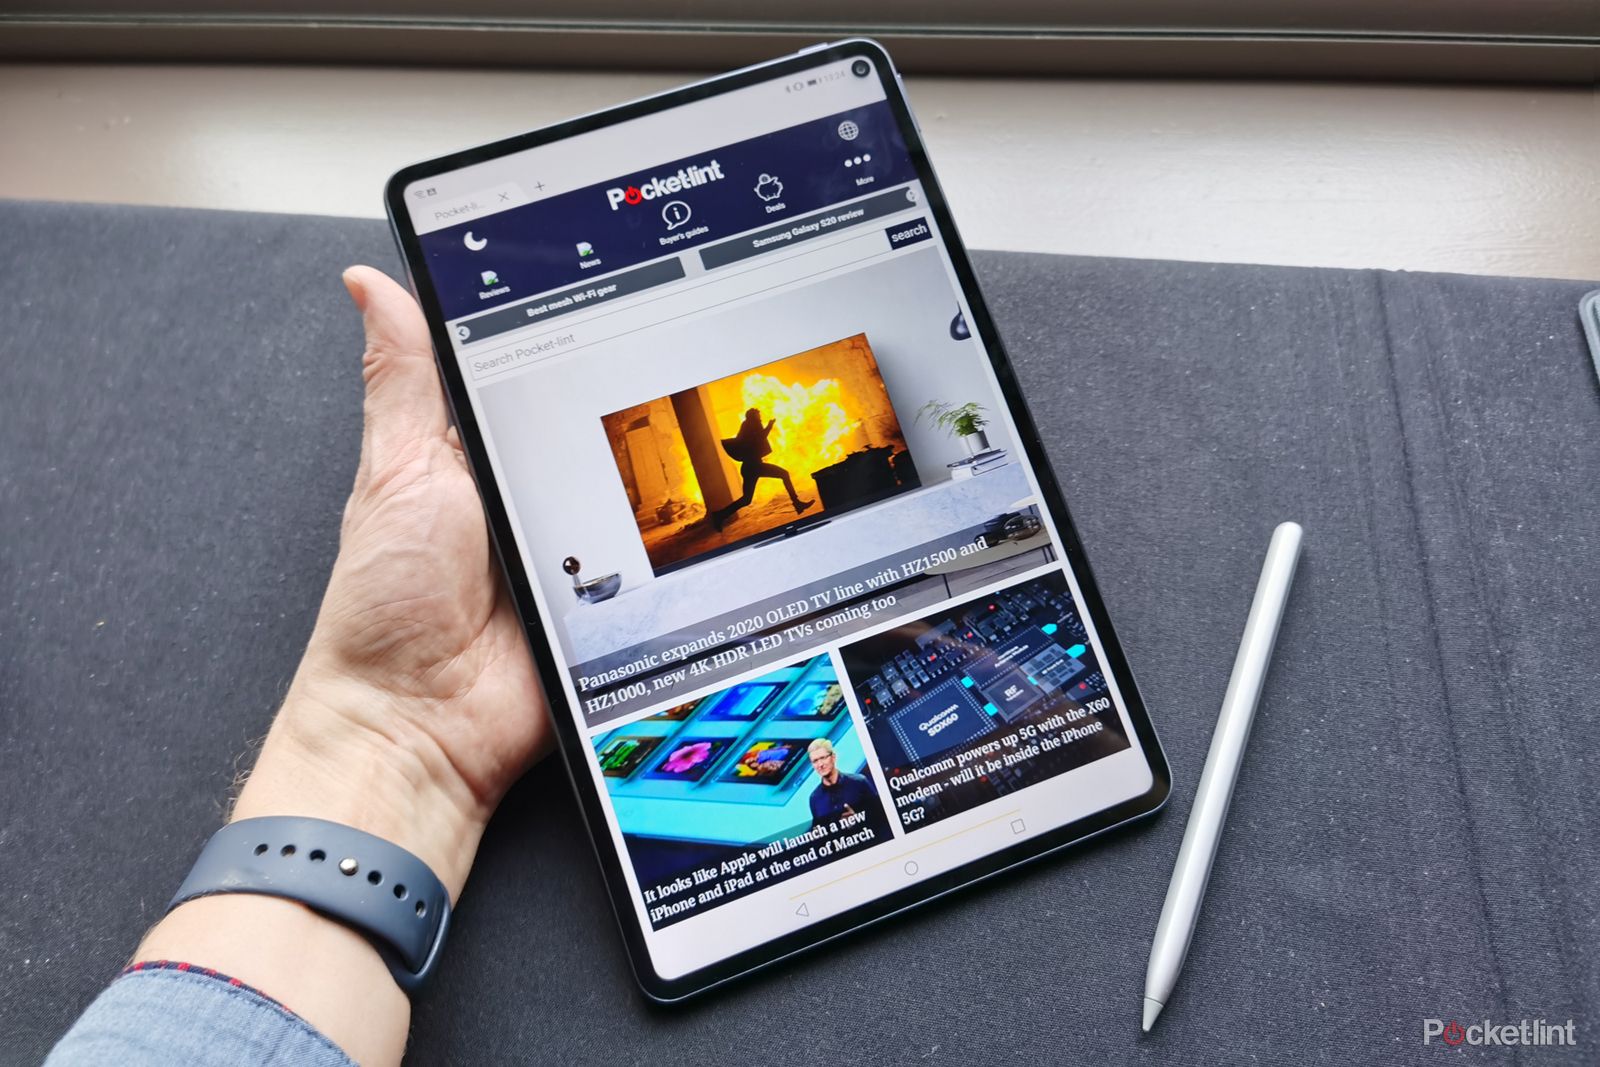 Huawei MatePad Pro 5G initial review Do you want a 5G tablet yet image 1